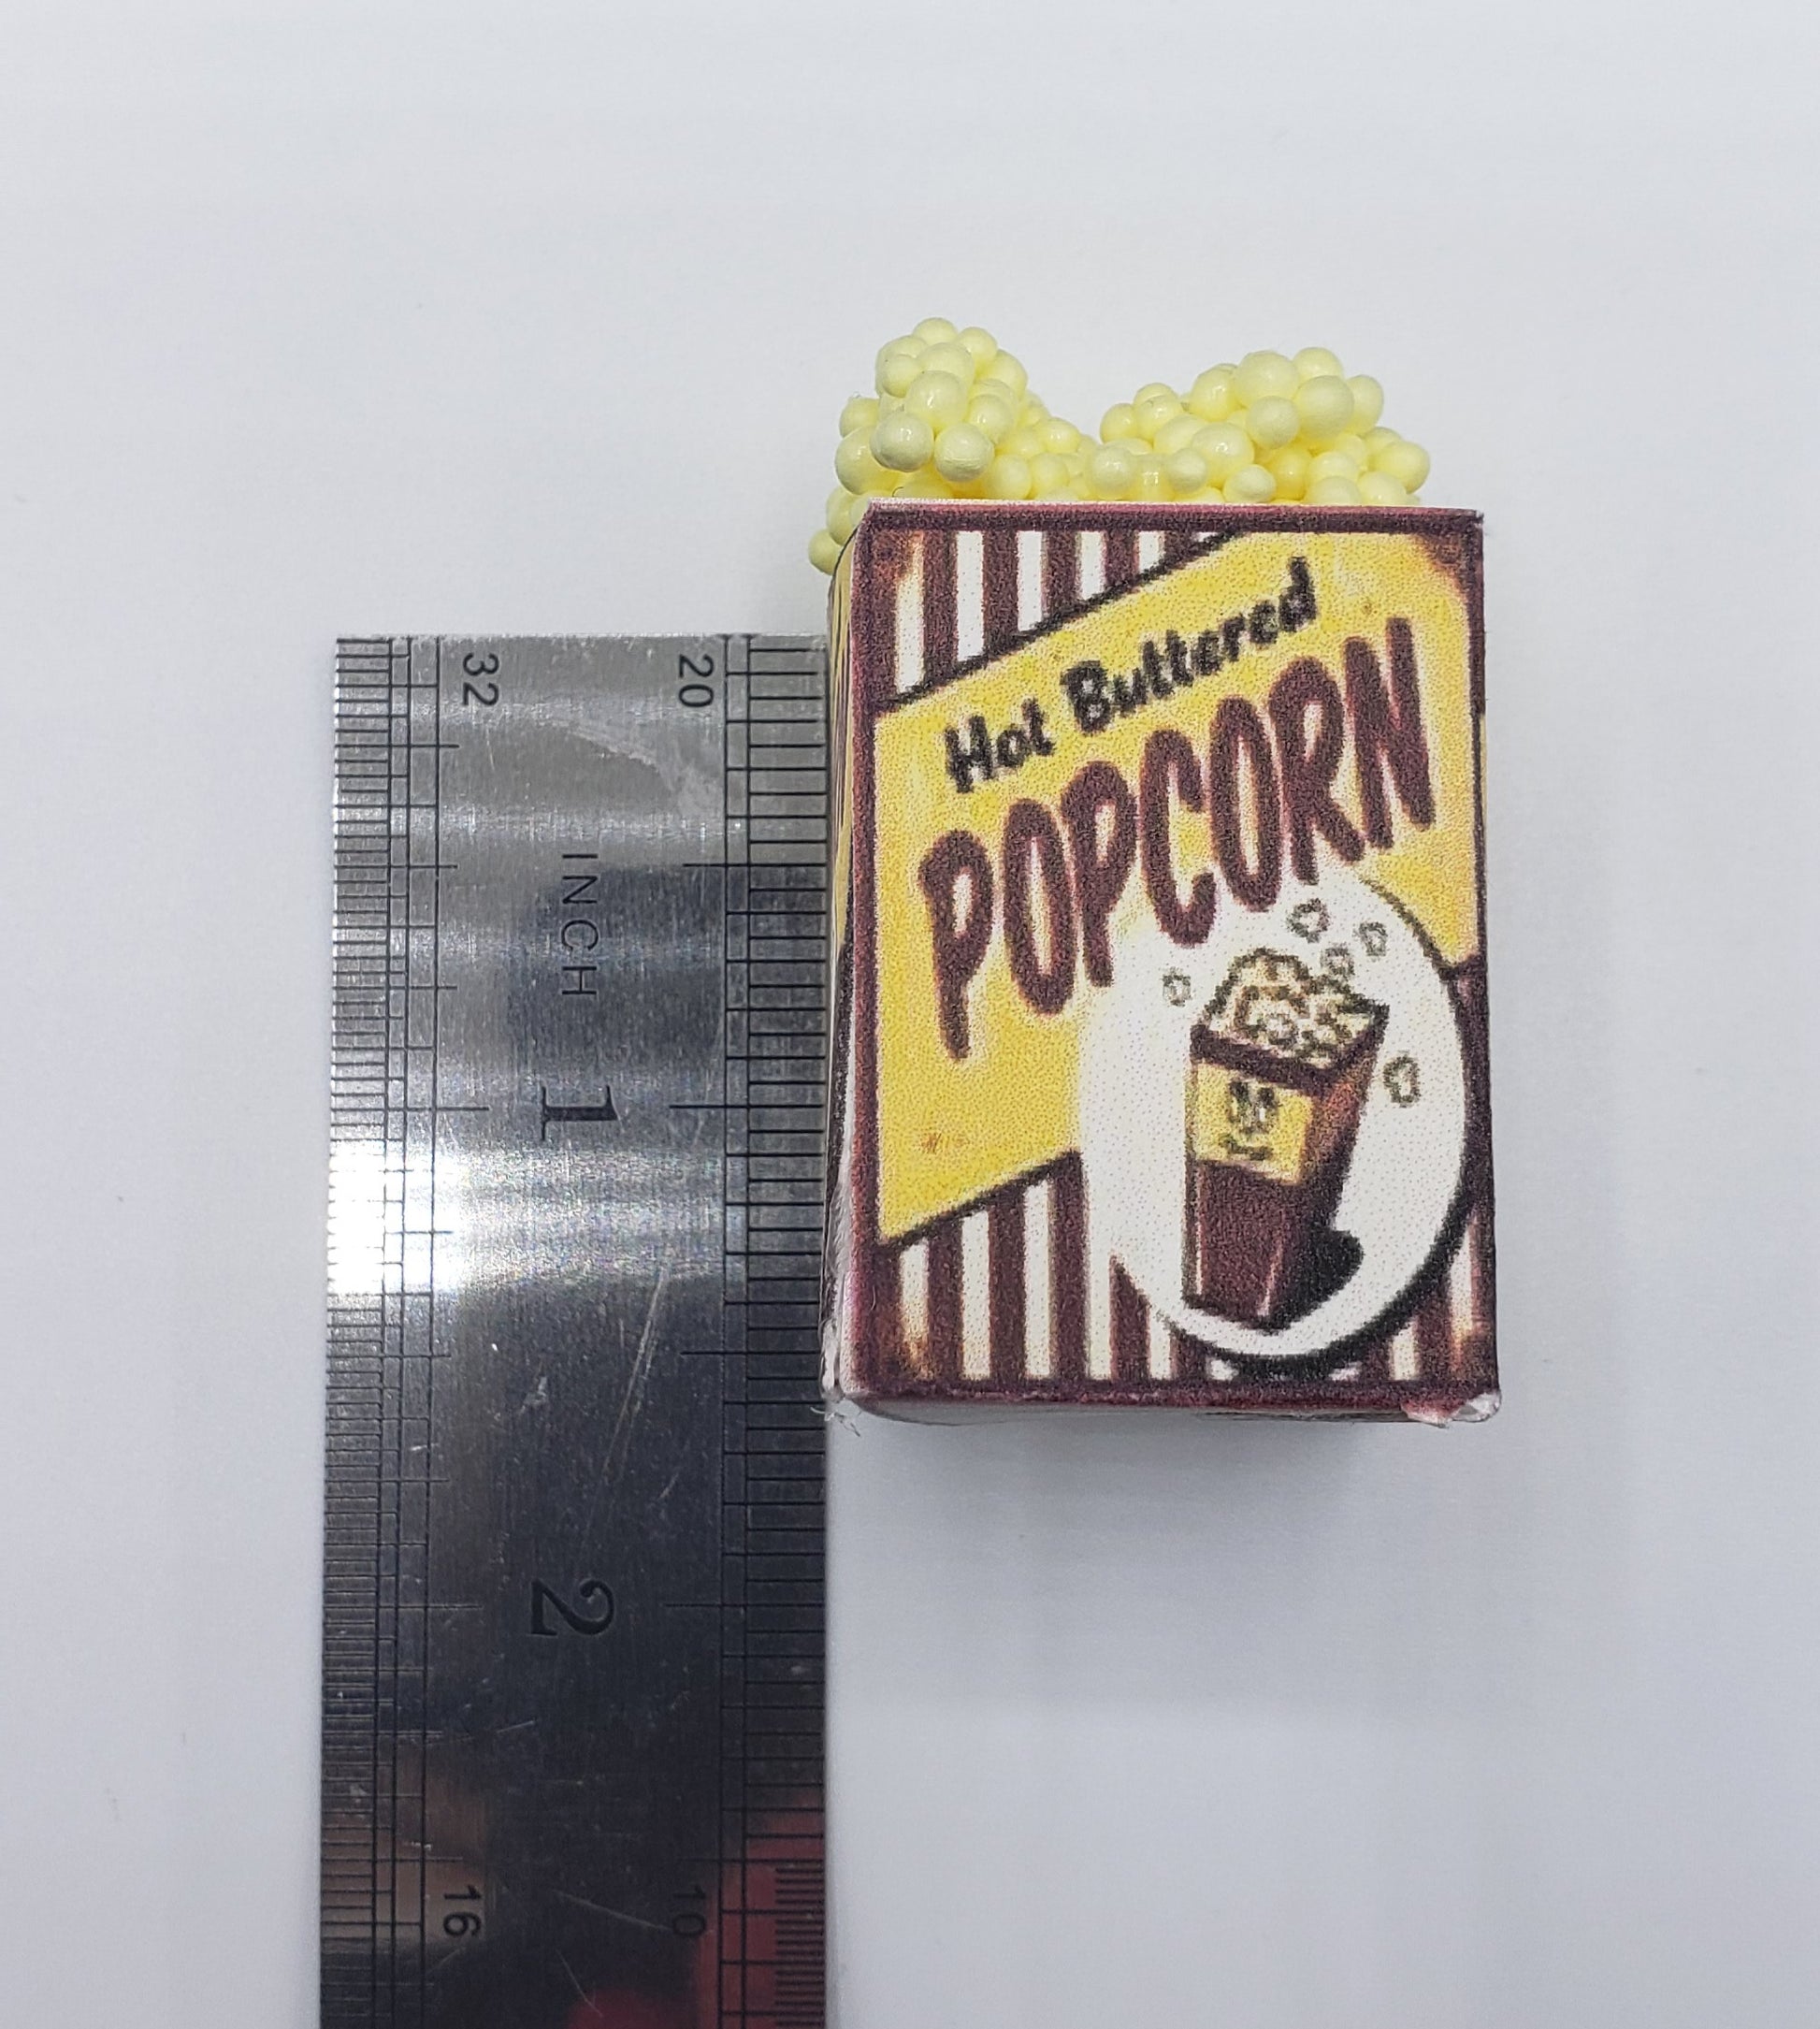 Large popcorn approx 1.5 inches